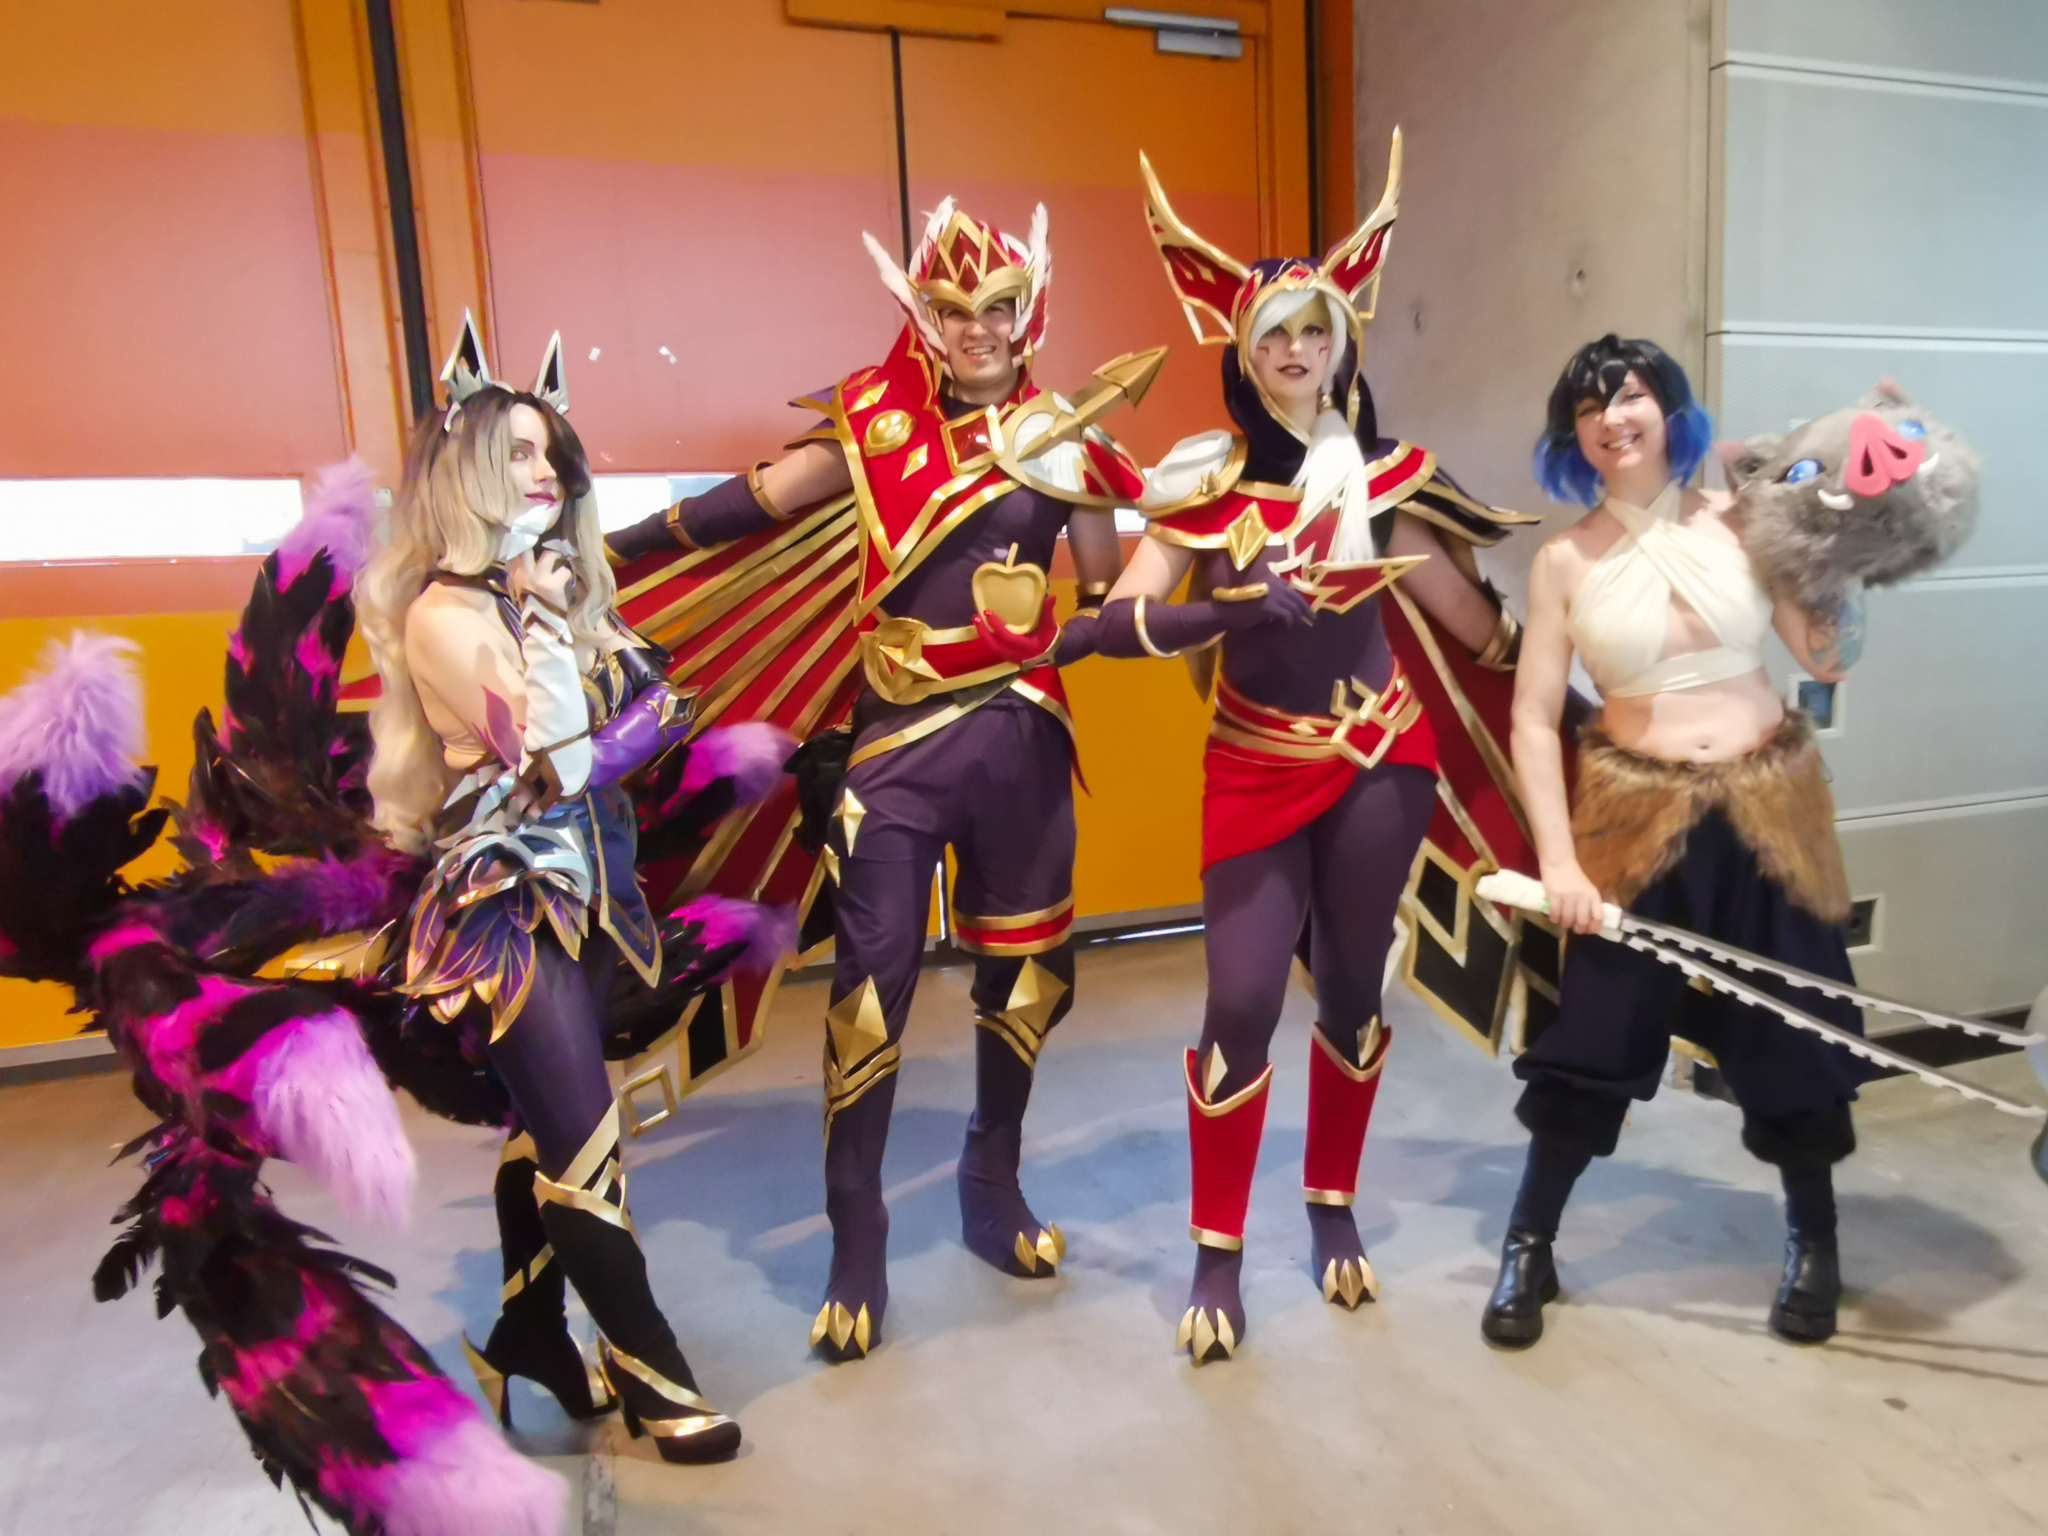 paiclyacosplay, tims_cosplay, luvenascosplay und Evelyn